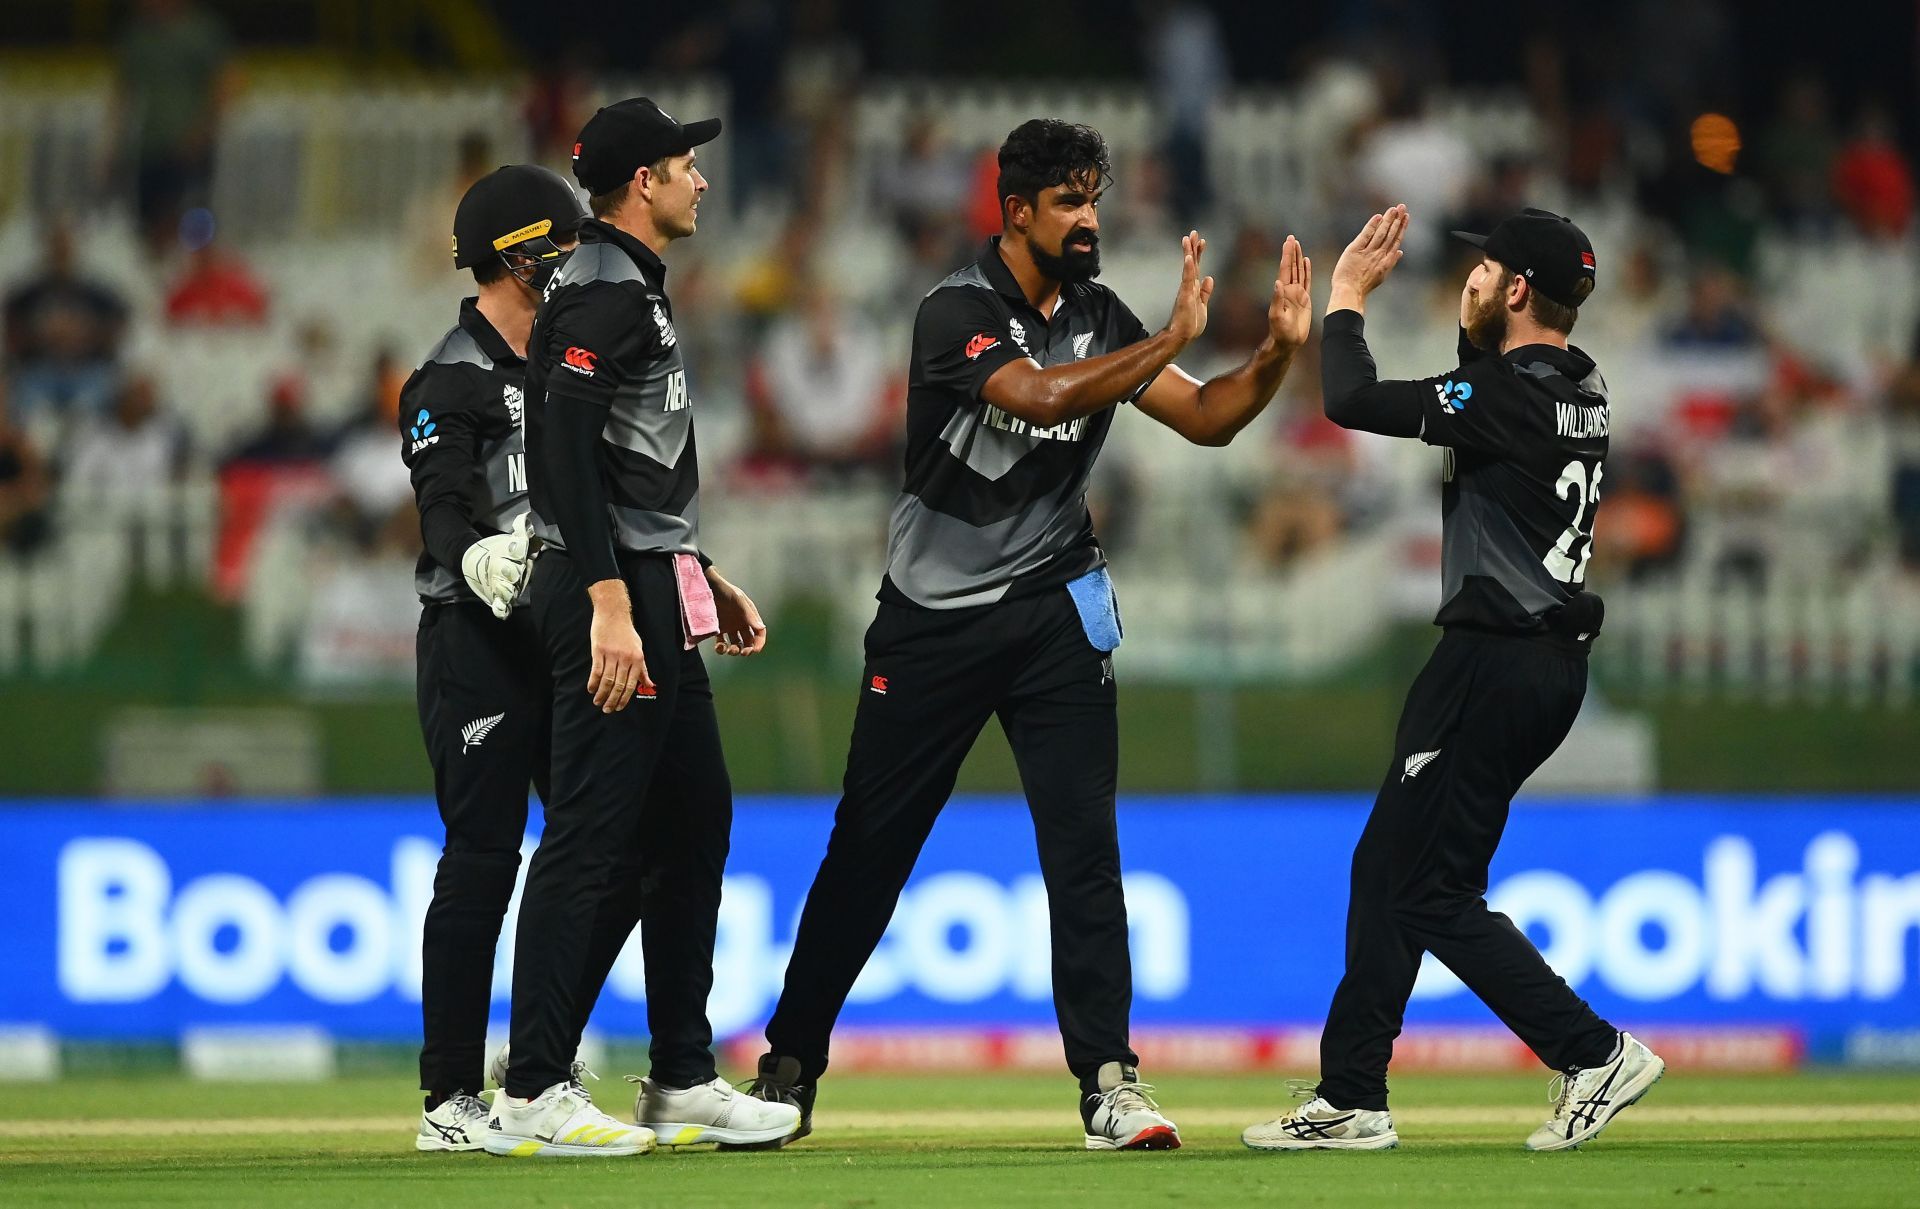 Aakash Chopra highlighted that New Zealand are meticulous in their planning